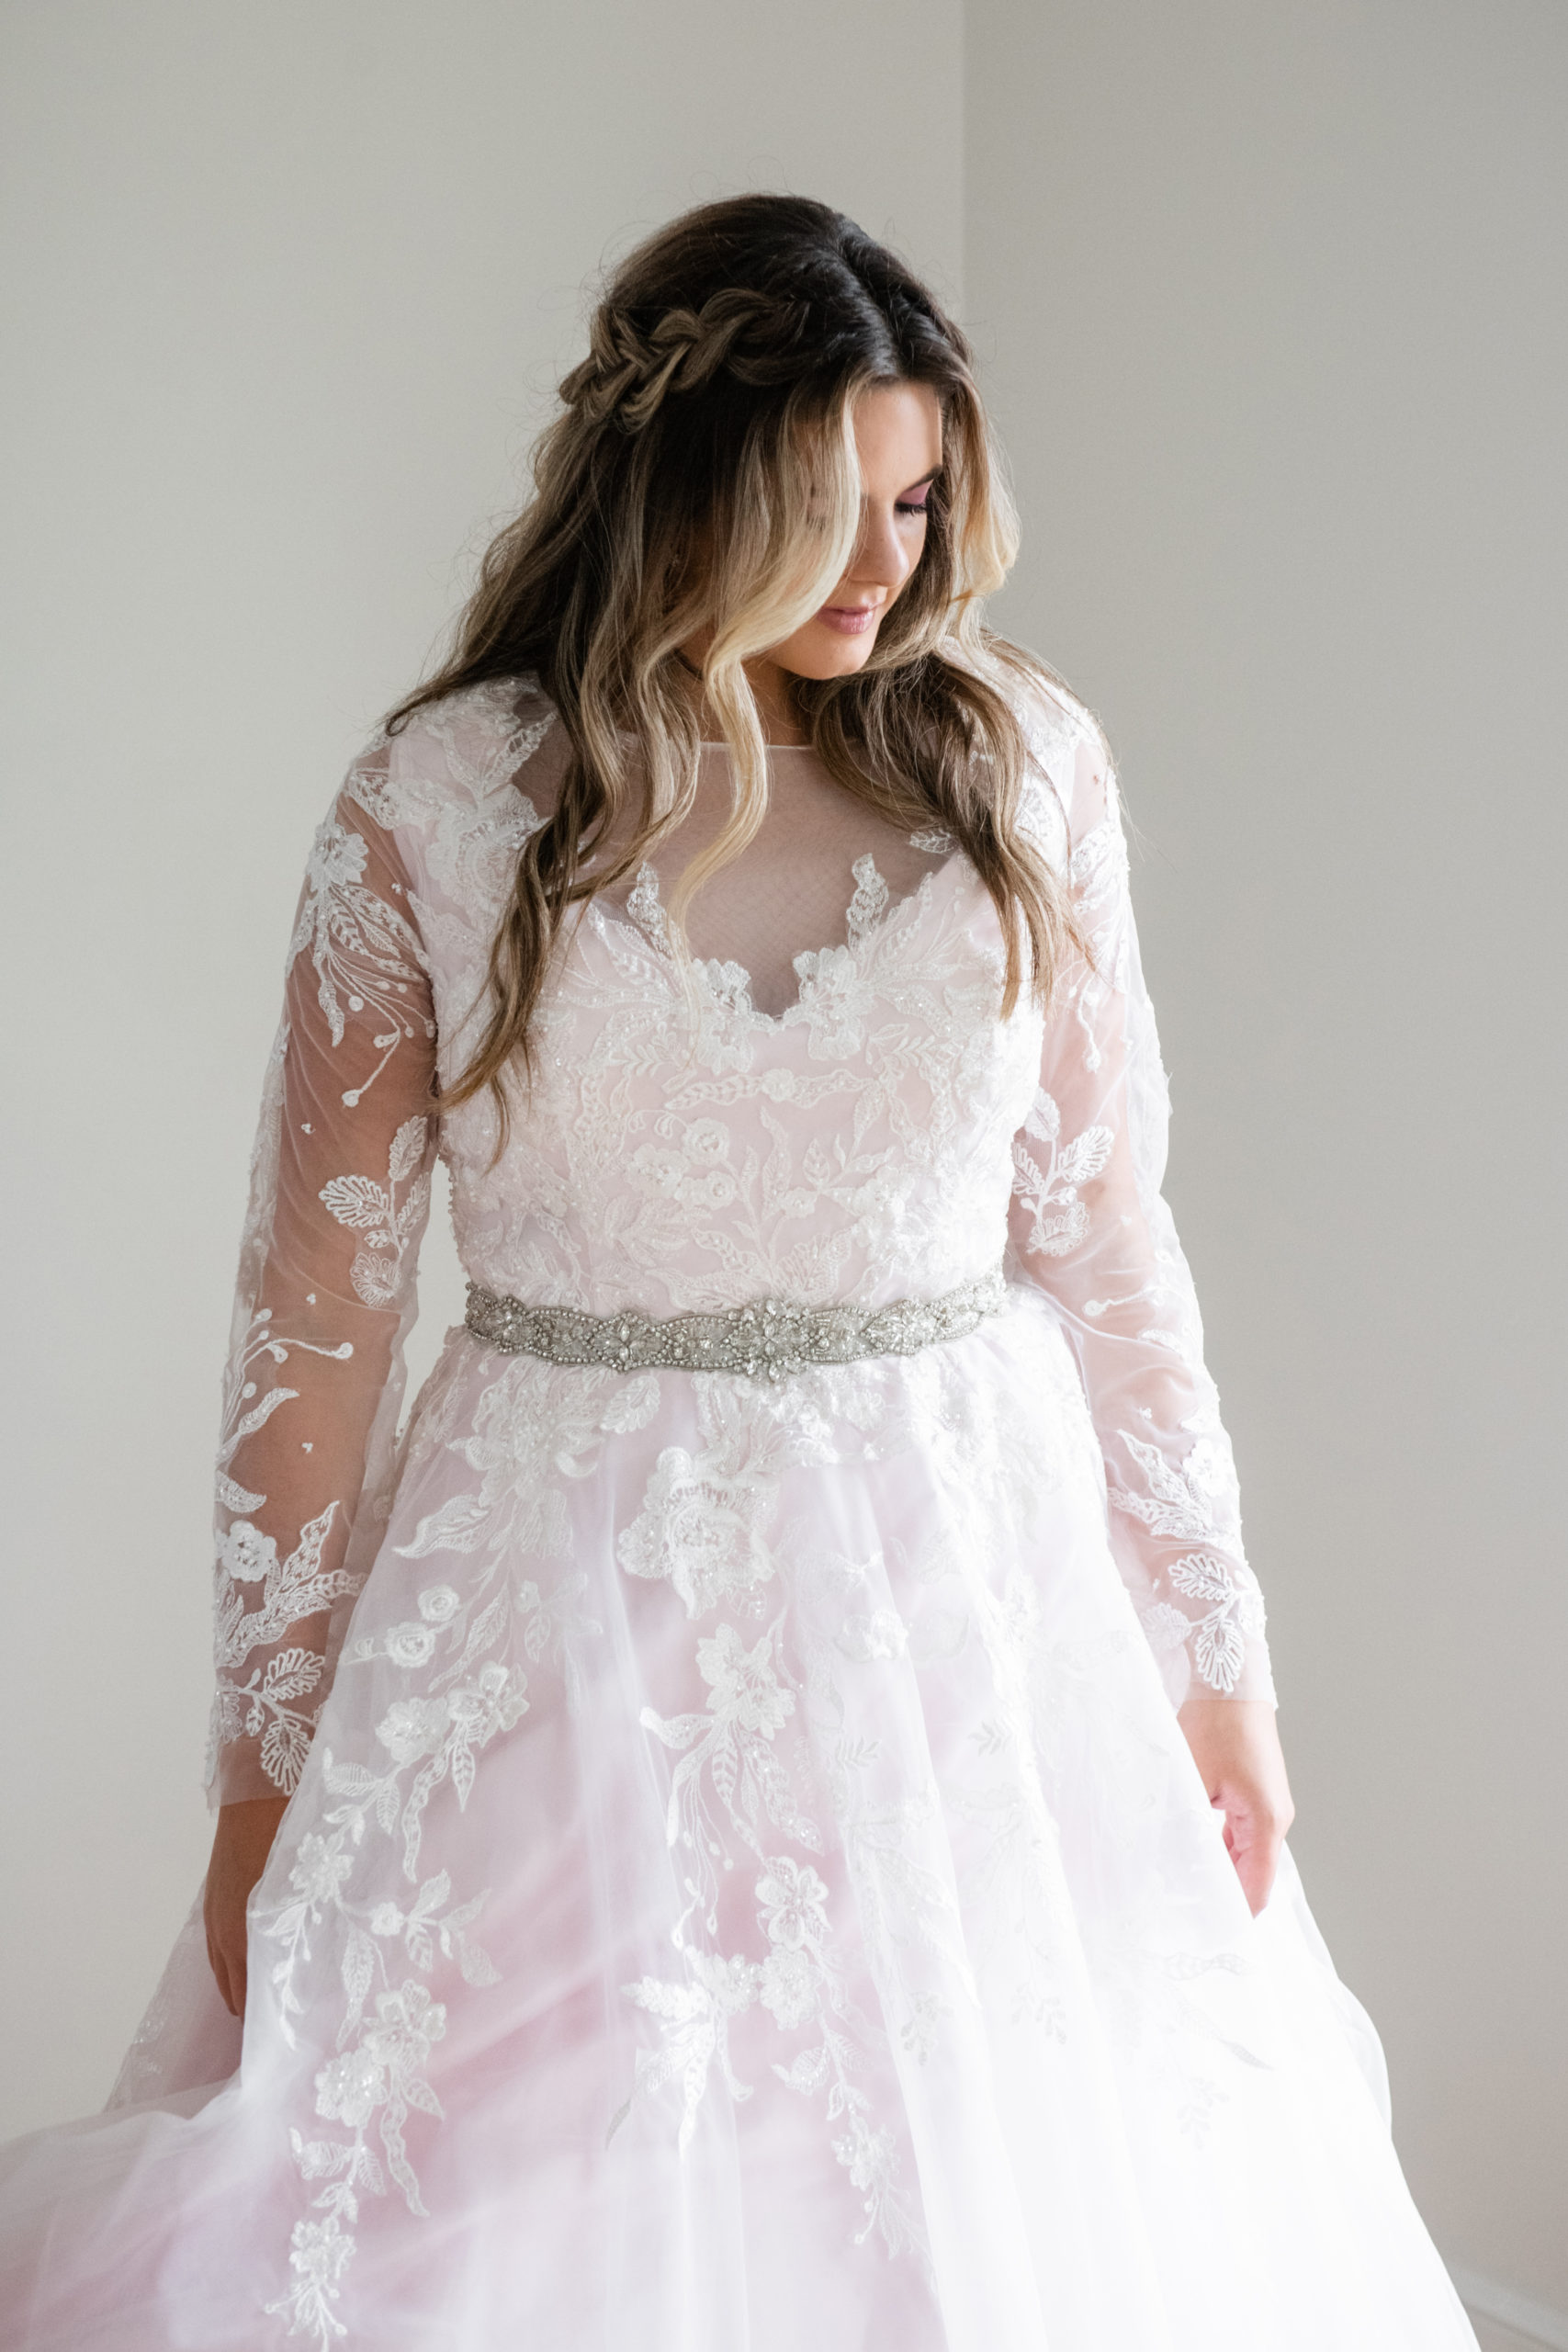 try your plus size wedding gown on | andi b bridal